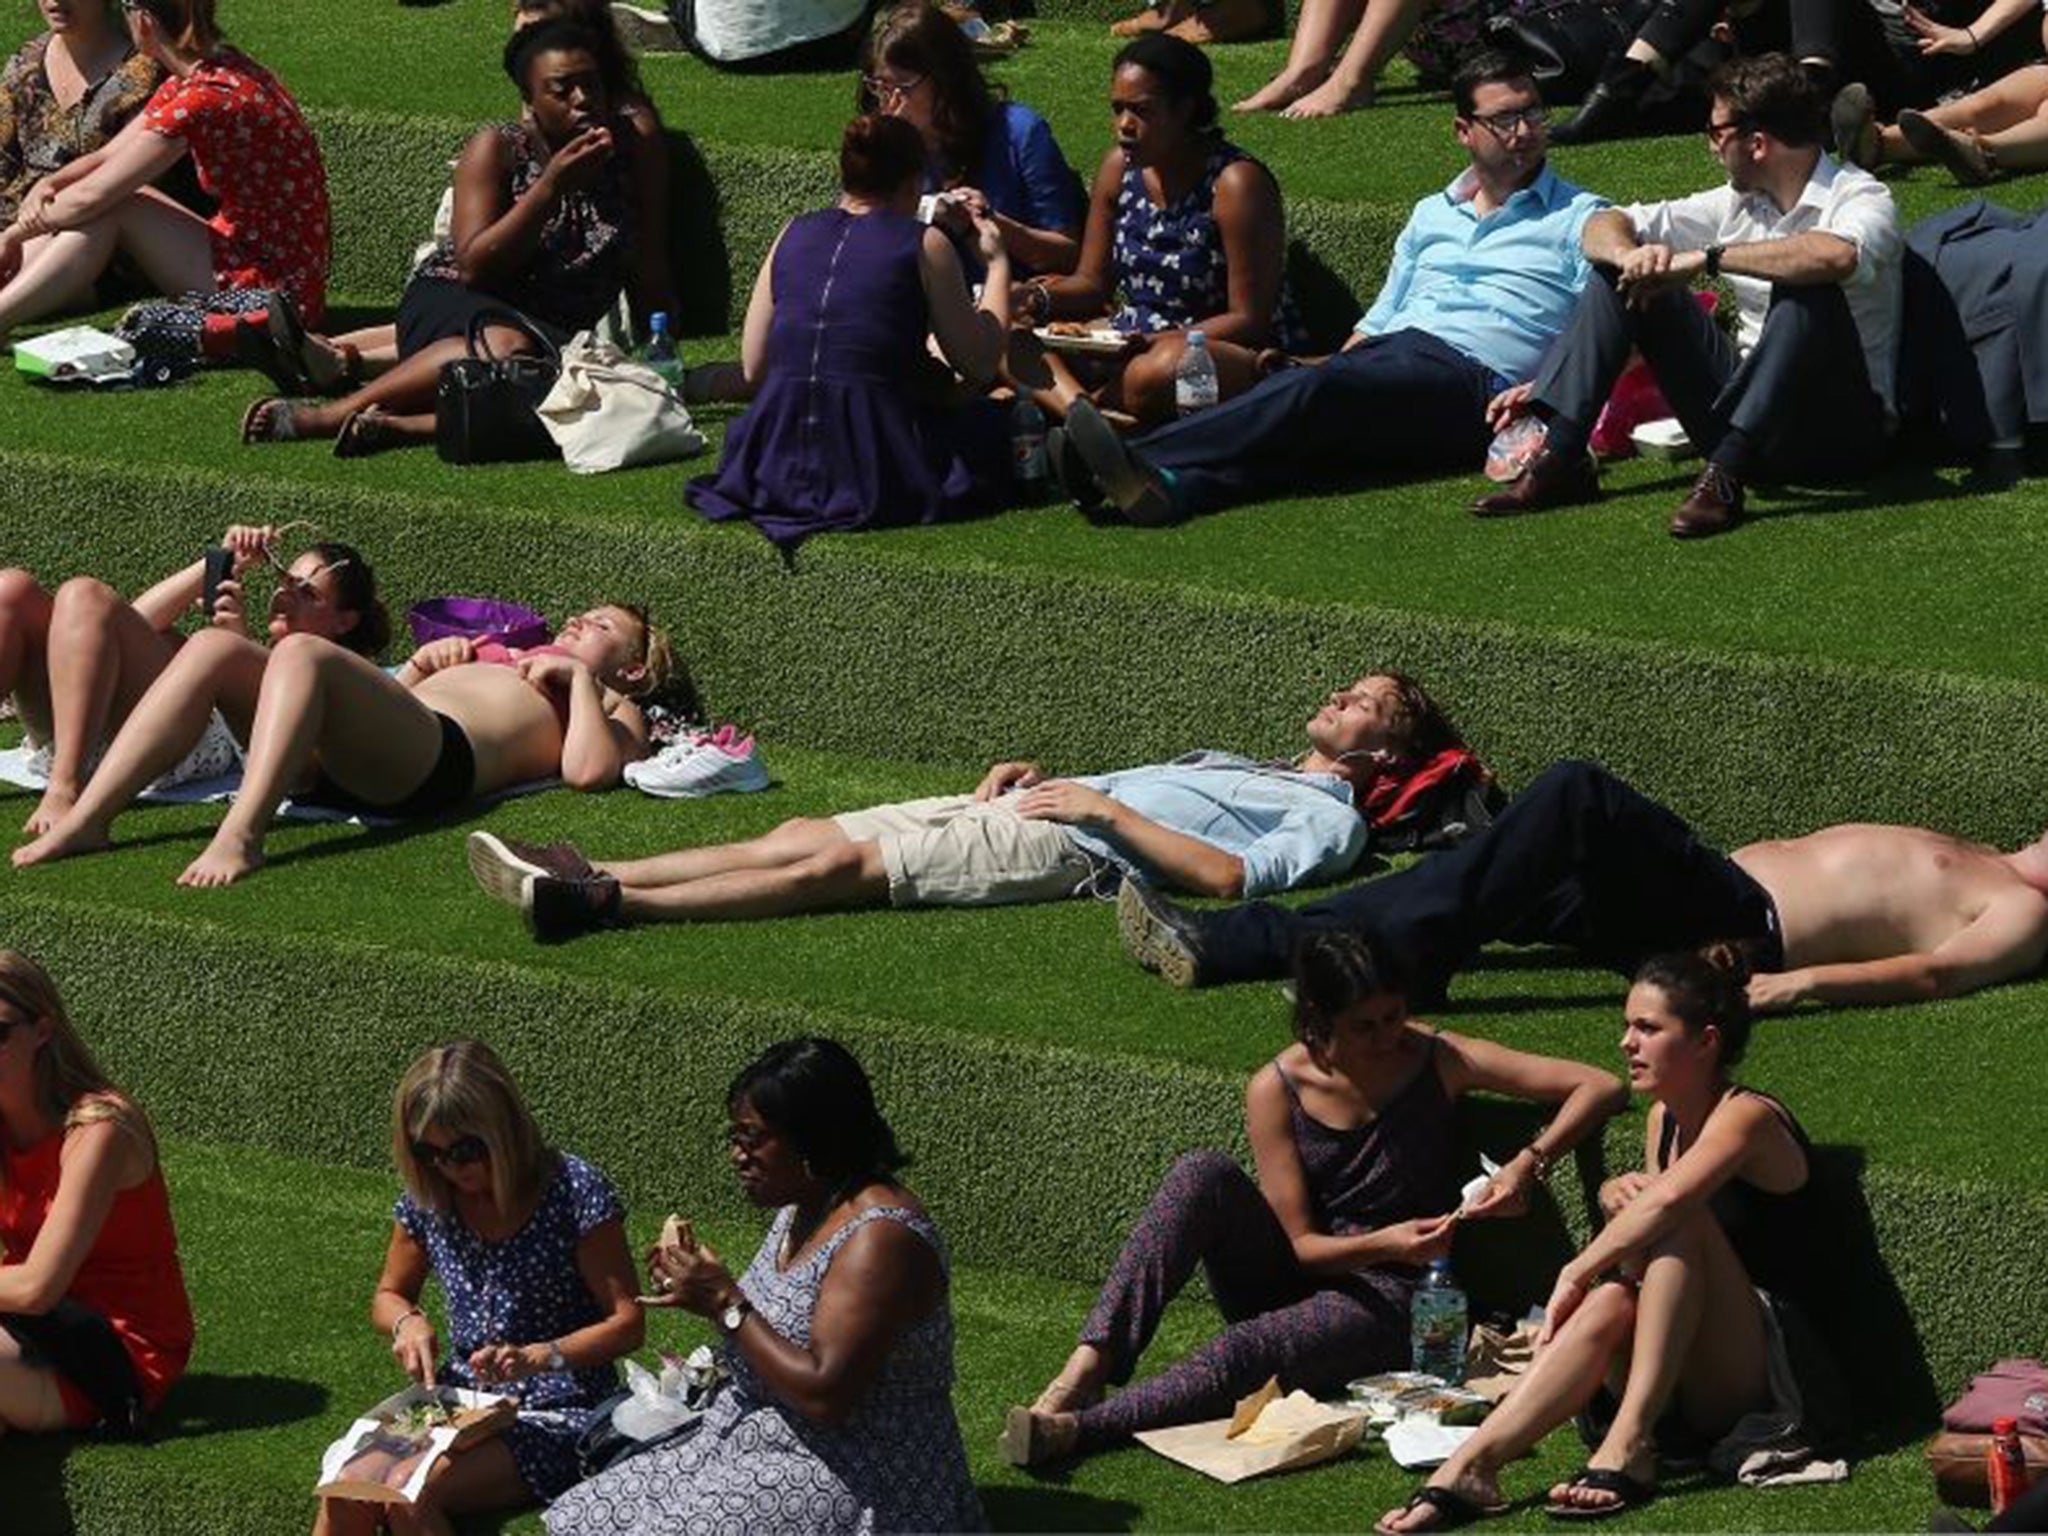 Londoners relax in an area next to the Regent's Canal at King's Cross lastin July 2014.